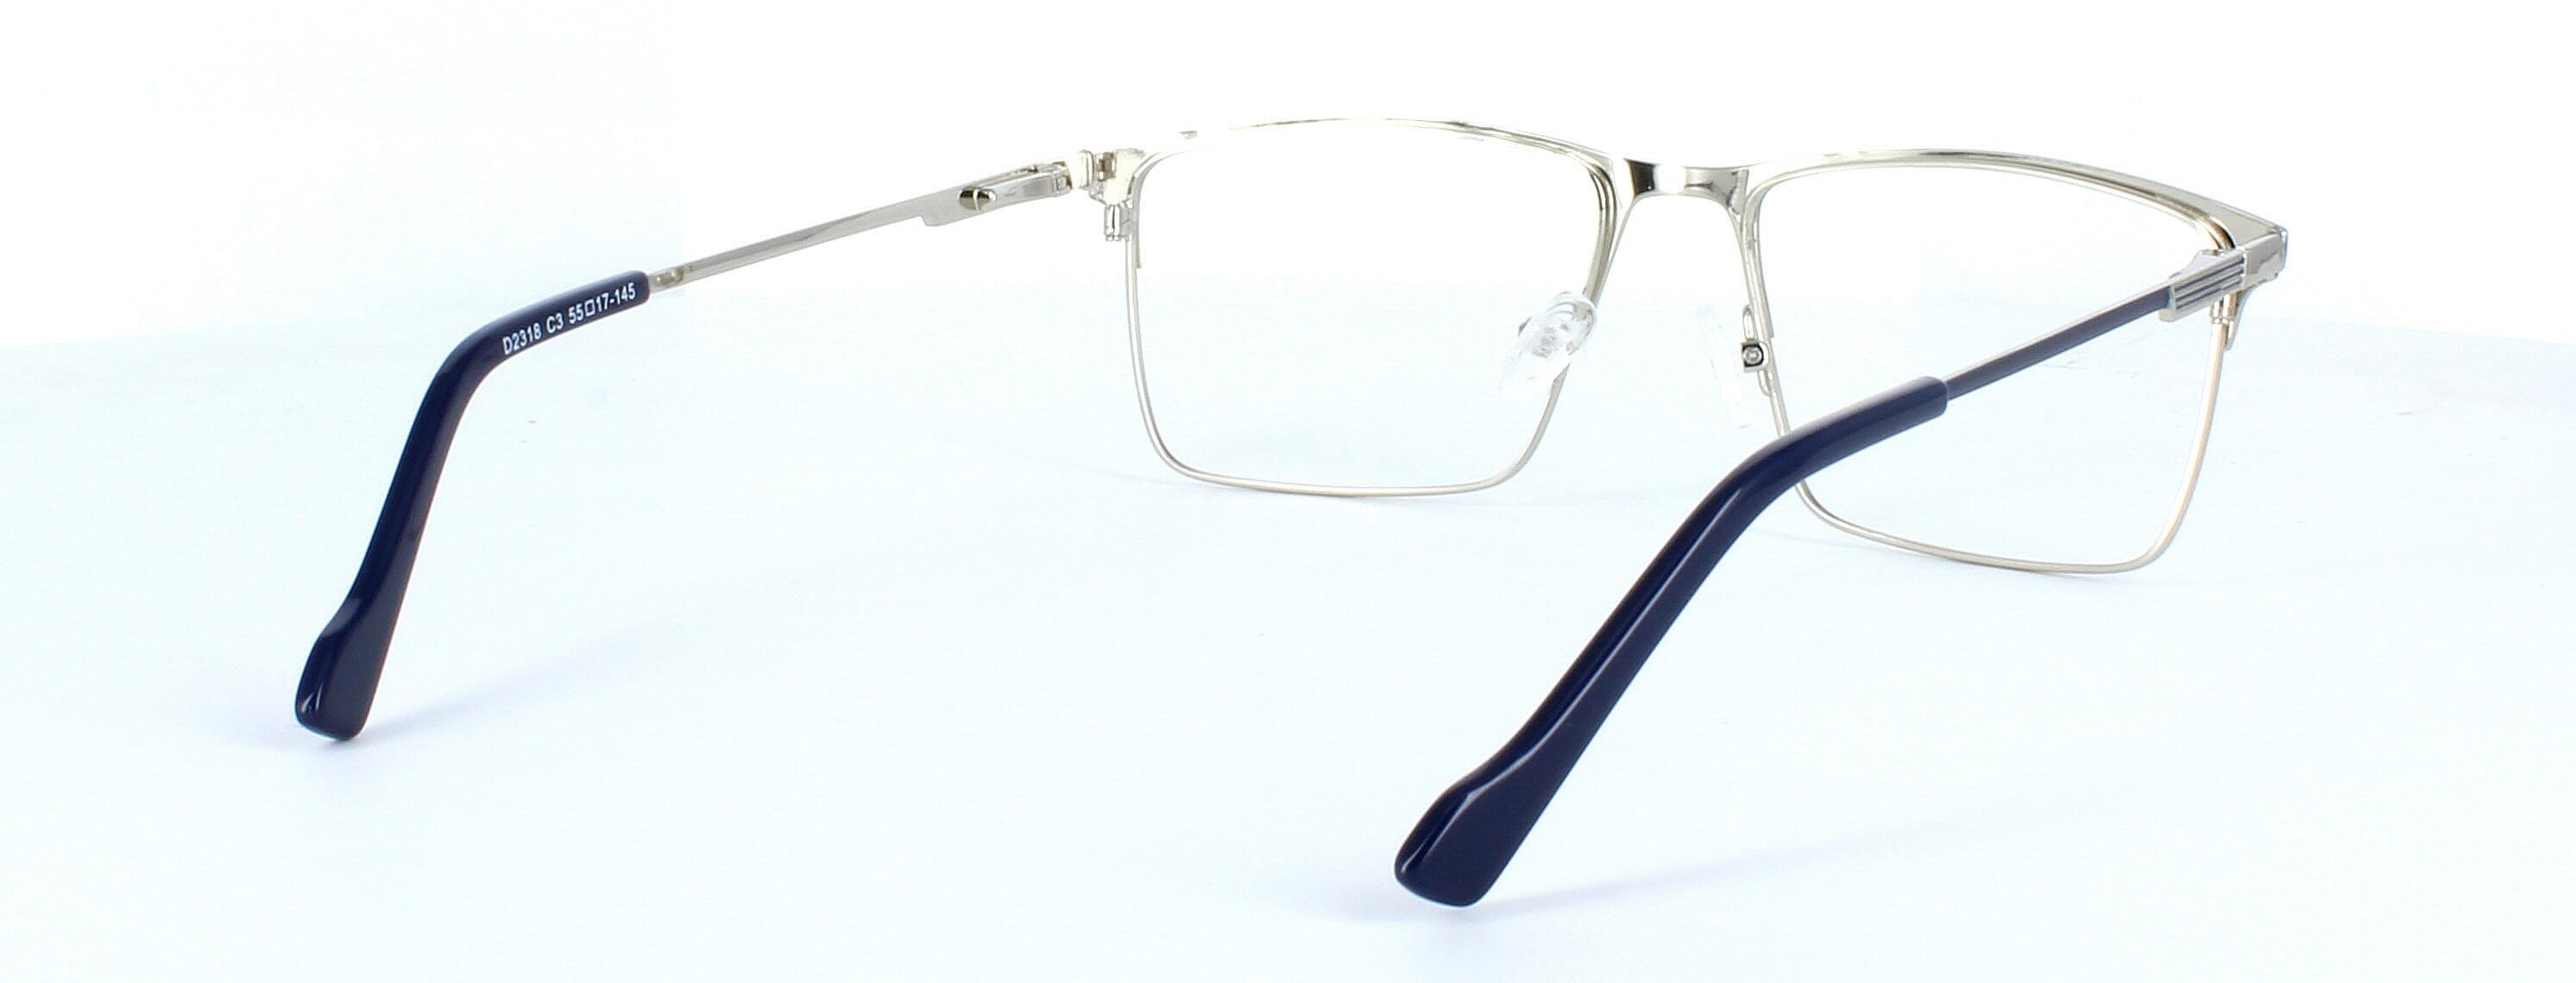 Warminster - blue & silver gent's glasses frame with rectangular shaped lenses - image view 4